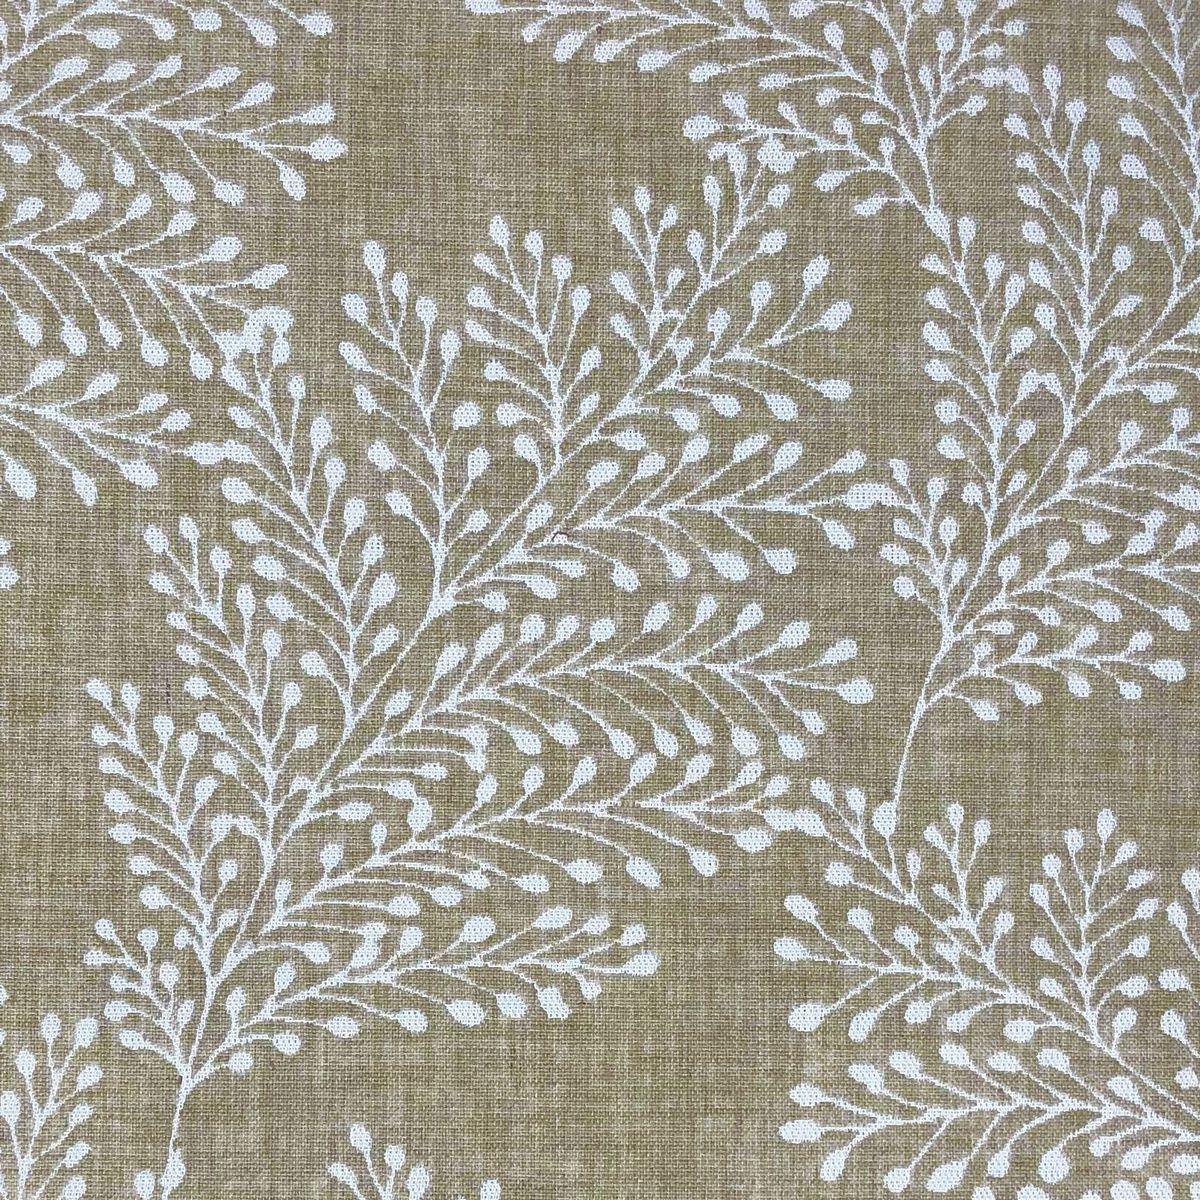 Kensington Biscuit Fabric by Chatham Glyn